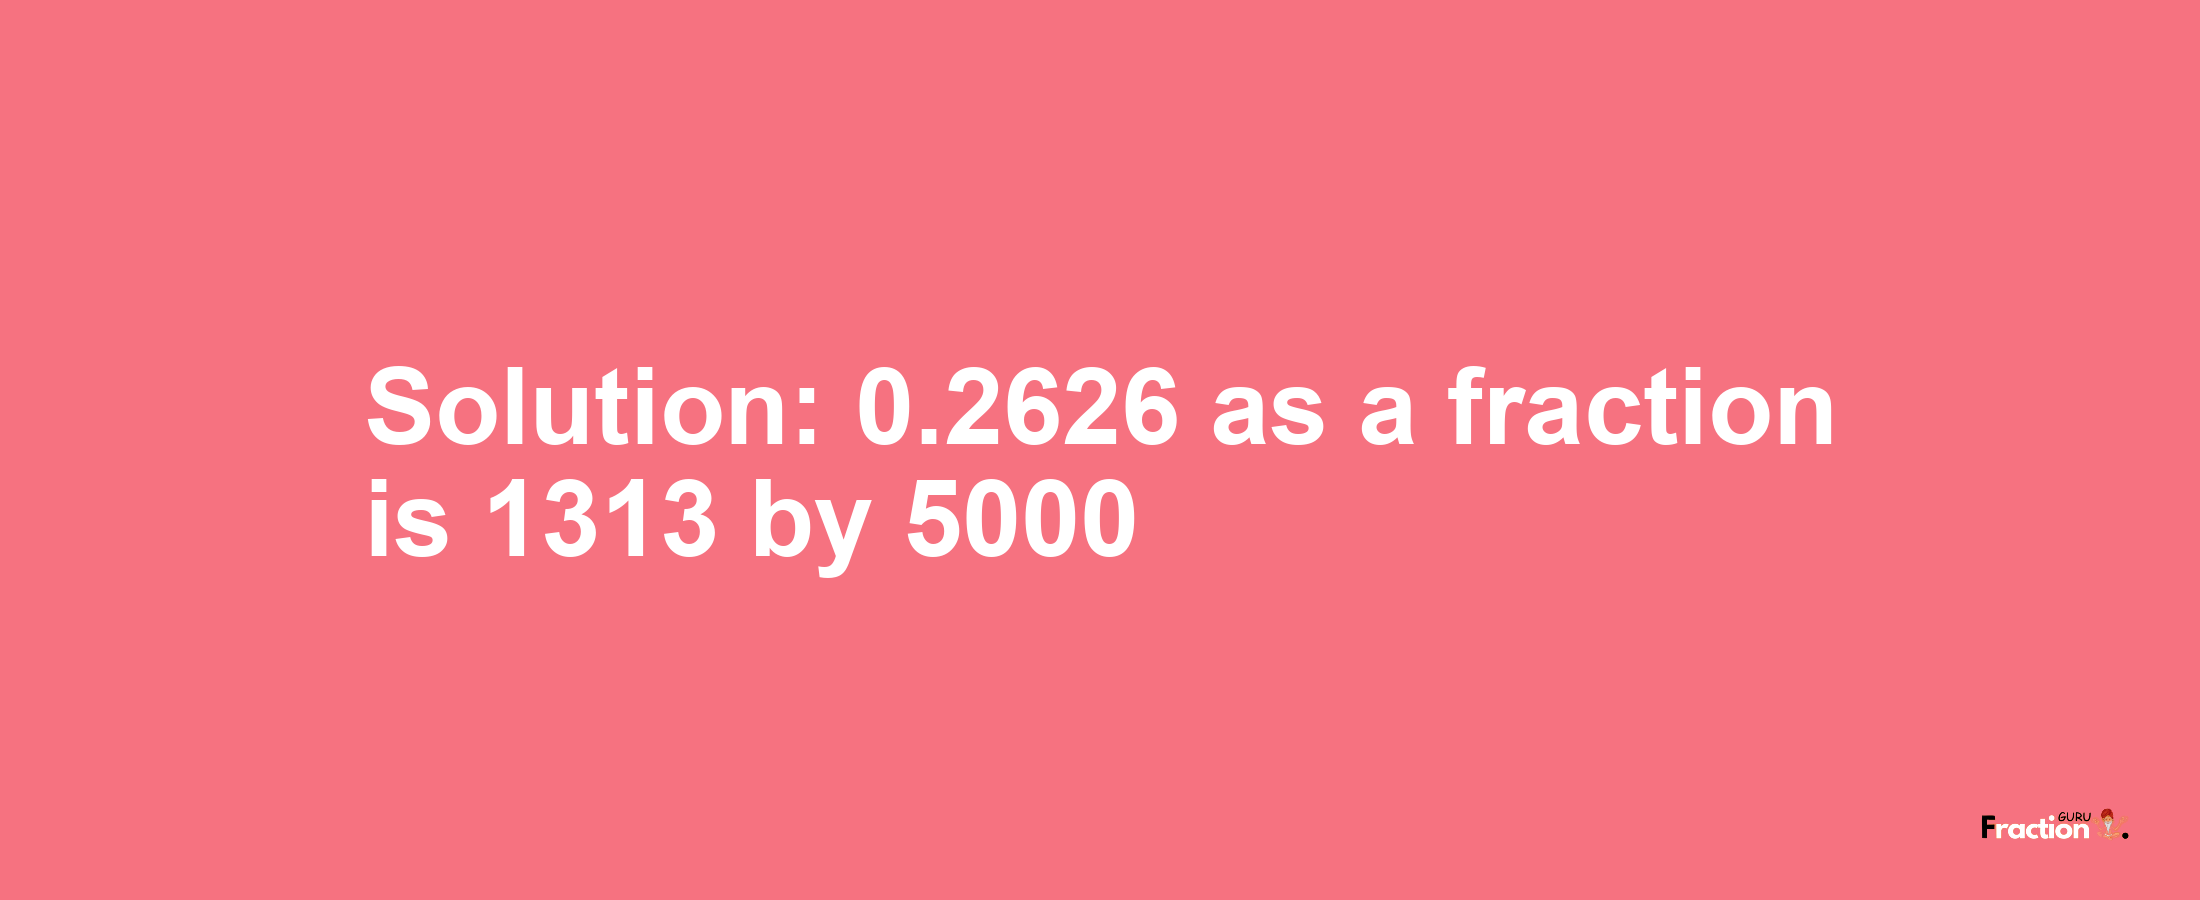 Solution:0.2626 as a fraction is 1313/5000